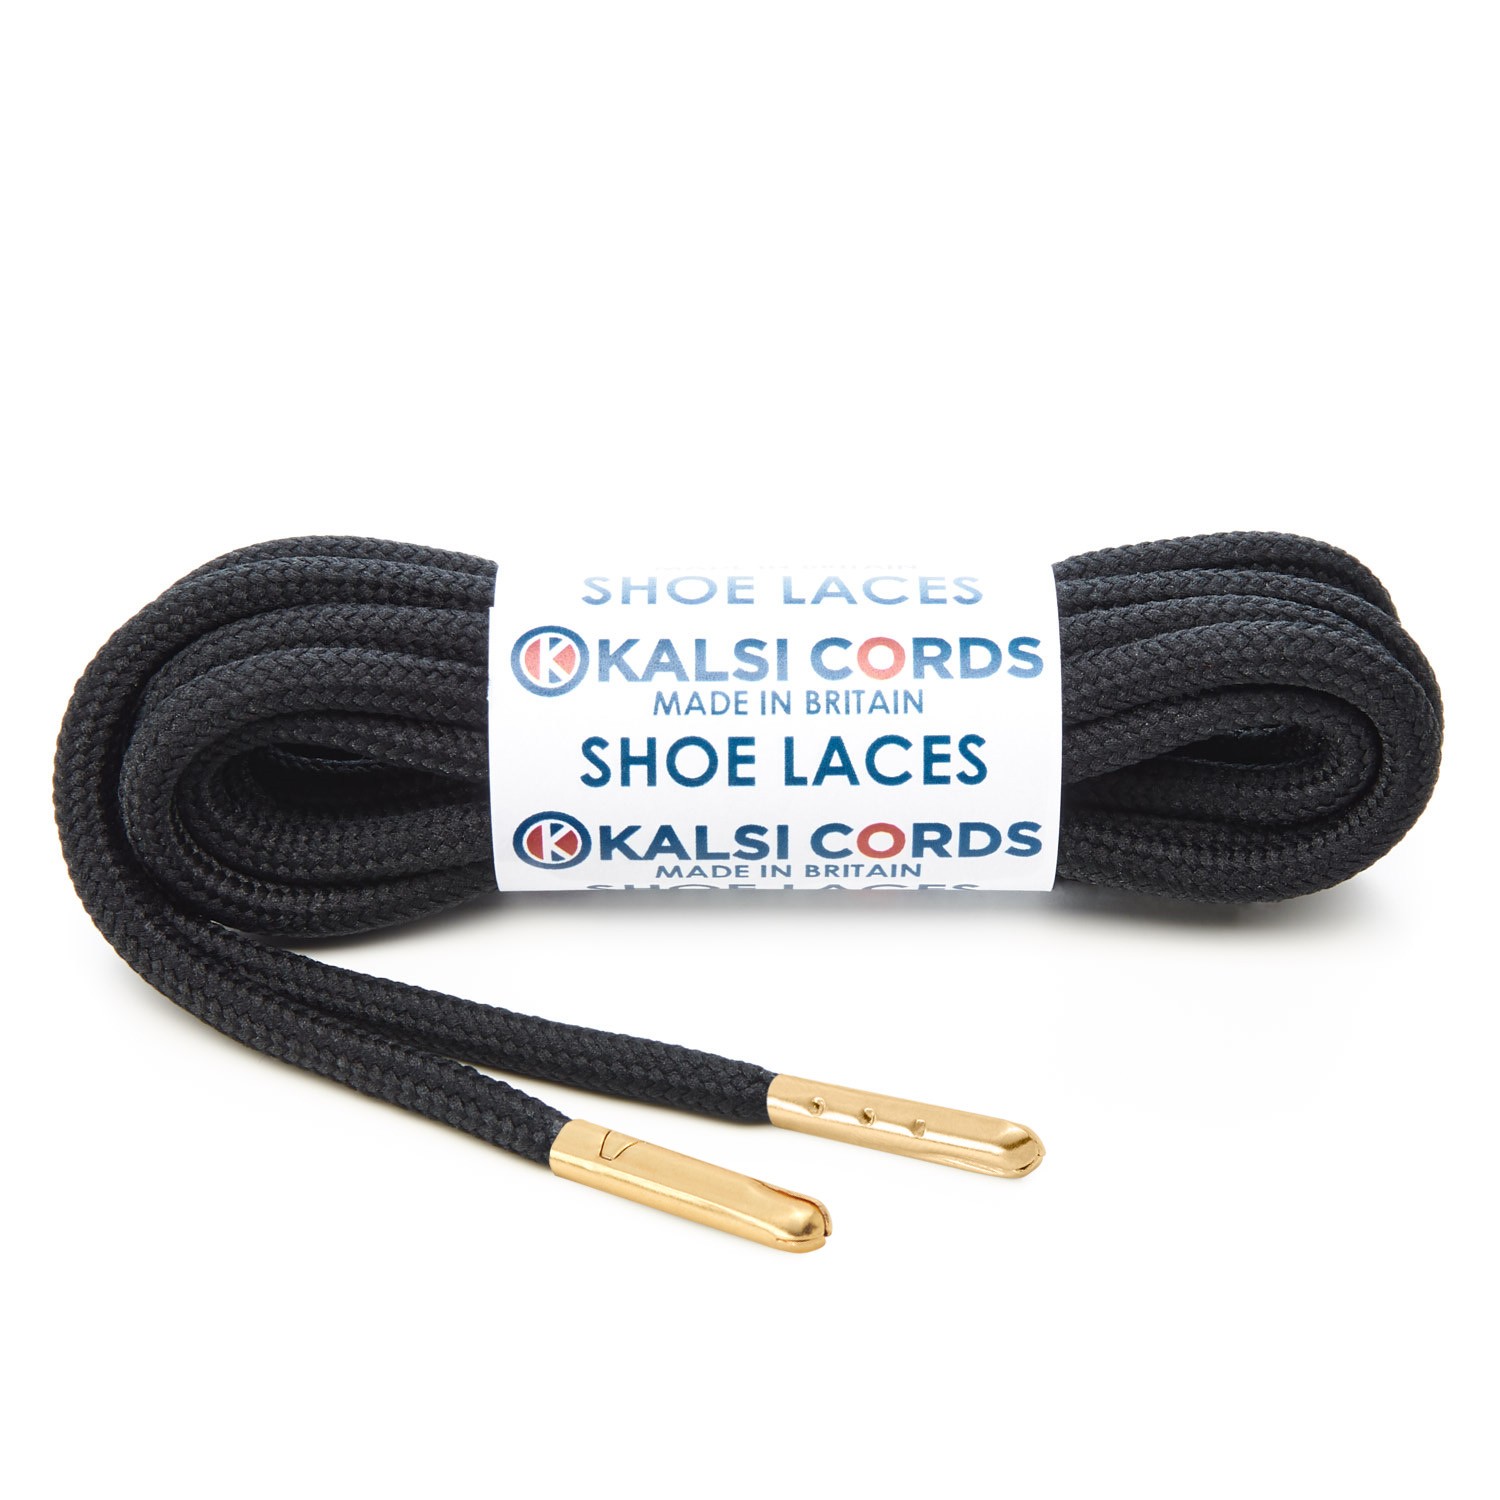 T621 5mm Round Polyester Shoe Laces Black 1 Gold Metal Tip Kalsi Cords